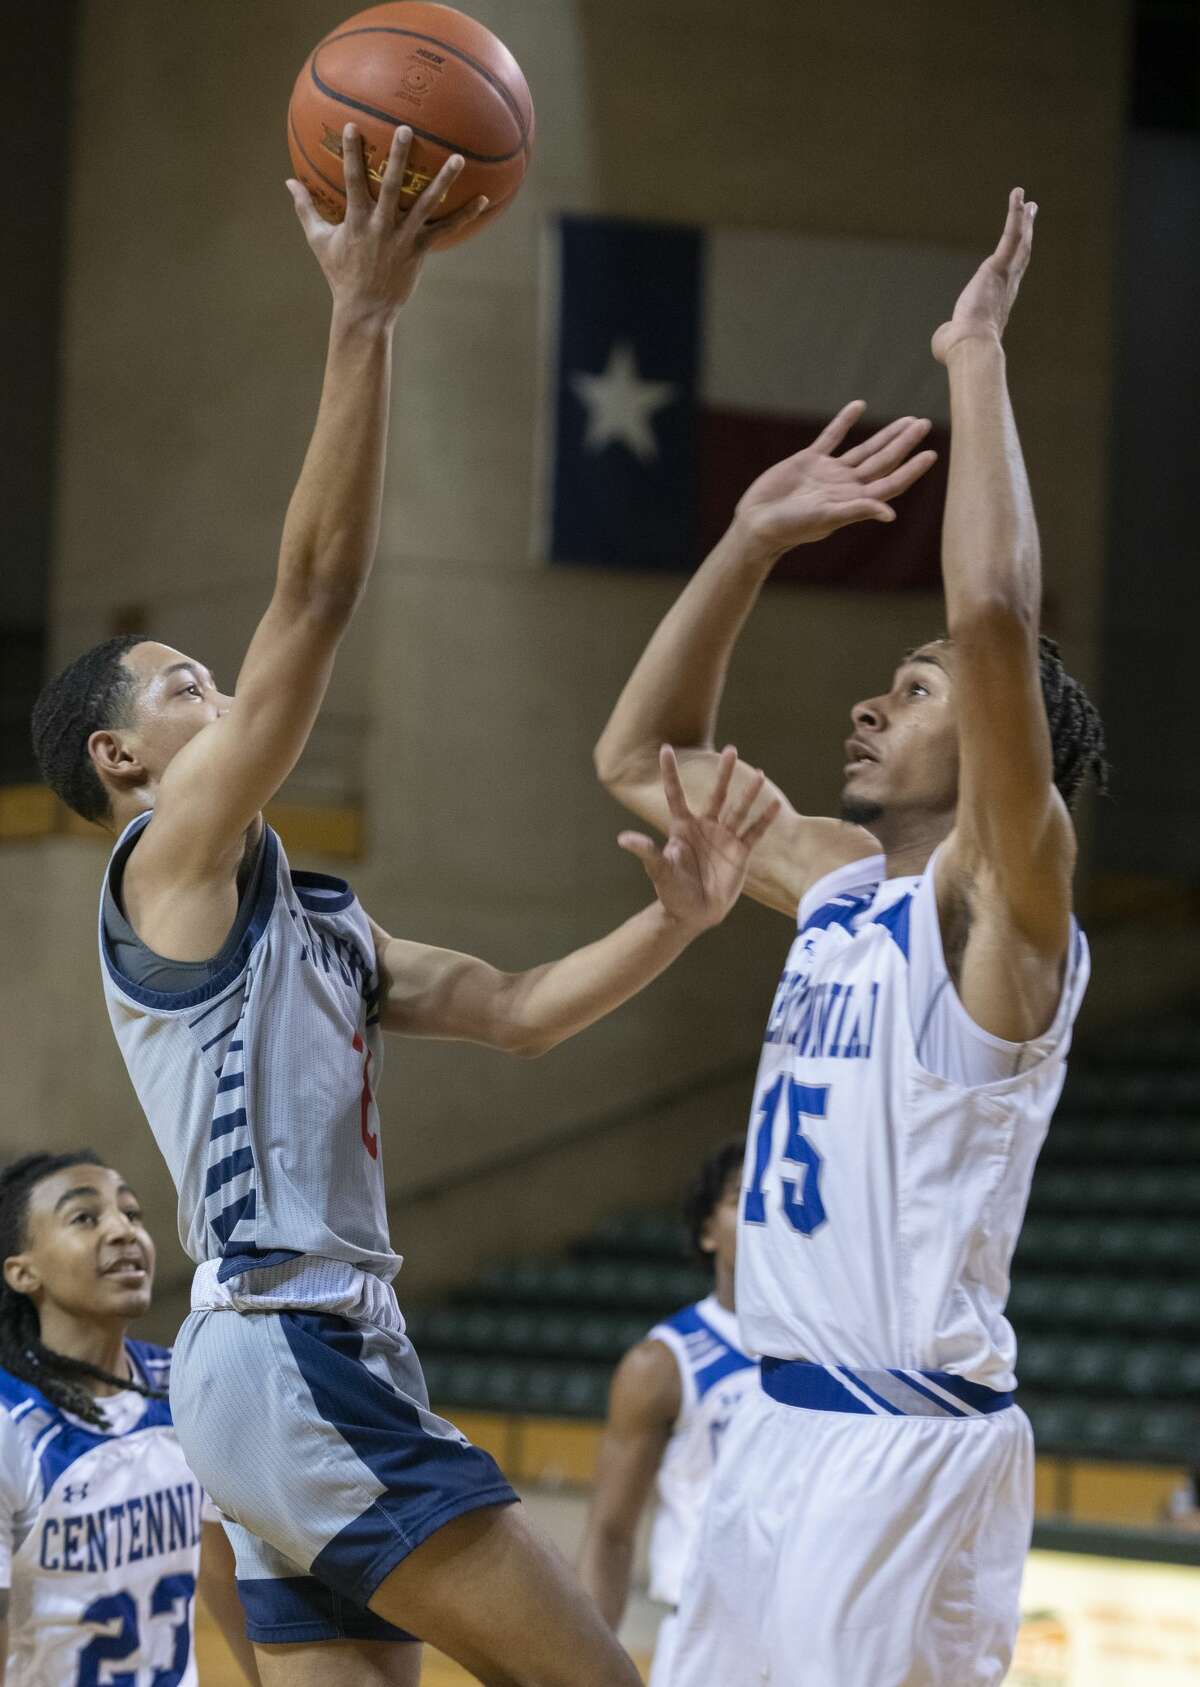 Plainview's Maddoz Ellis drives in for a layup as Burleson Centennial's Jordan Jenkins defends 12/29/2021 during the Byron Johnston Holiday Classic at the Chaparral Center. Tim Fischer/Reporter-Telegram